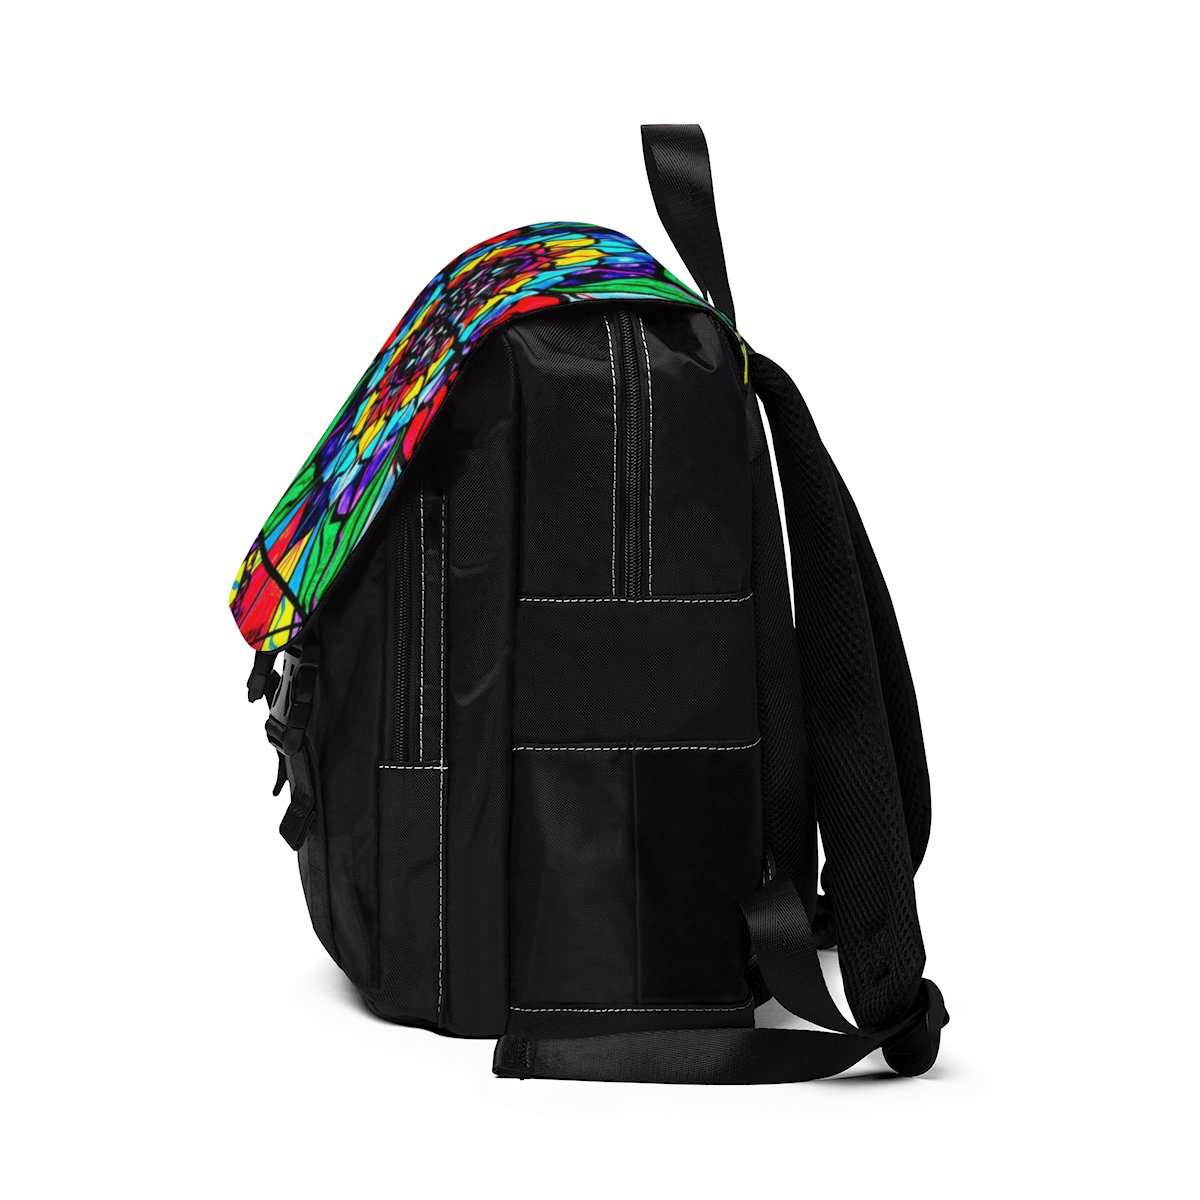 get-the-latest-in-sports-personal-expansion-unisex-casual-shoulder-backpack-online_2.jpg